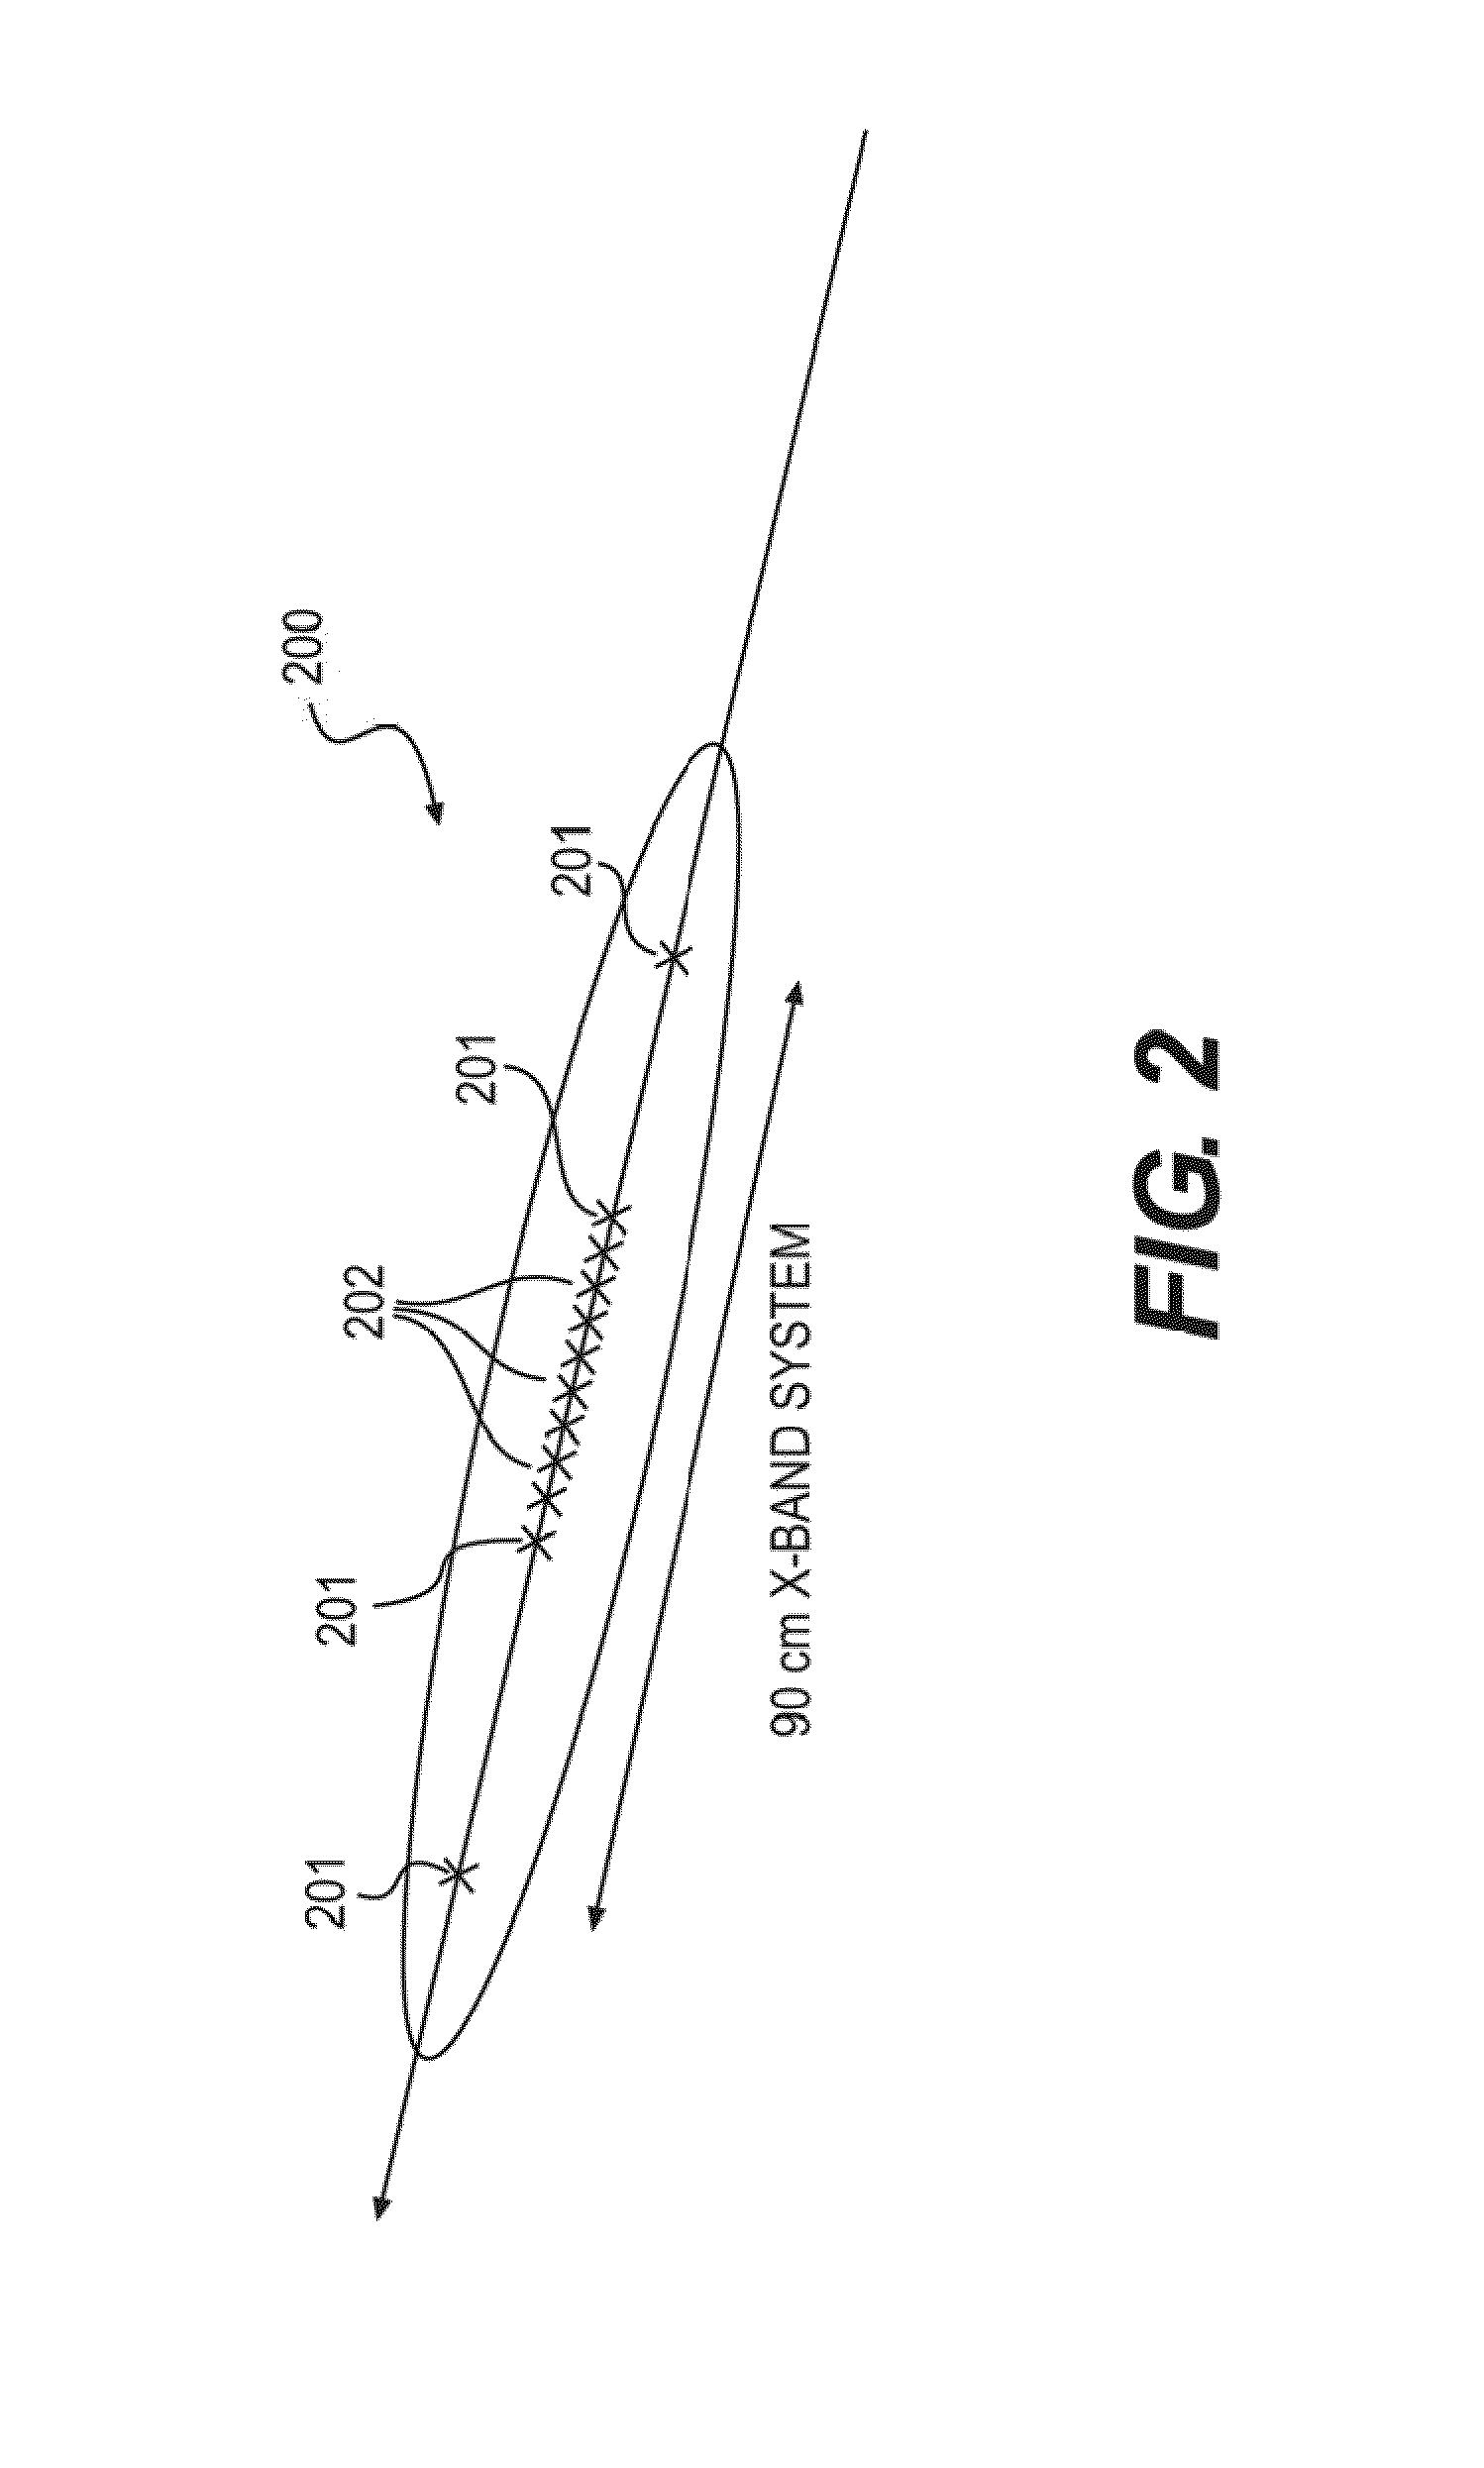 Collision avoidance system and method